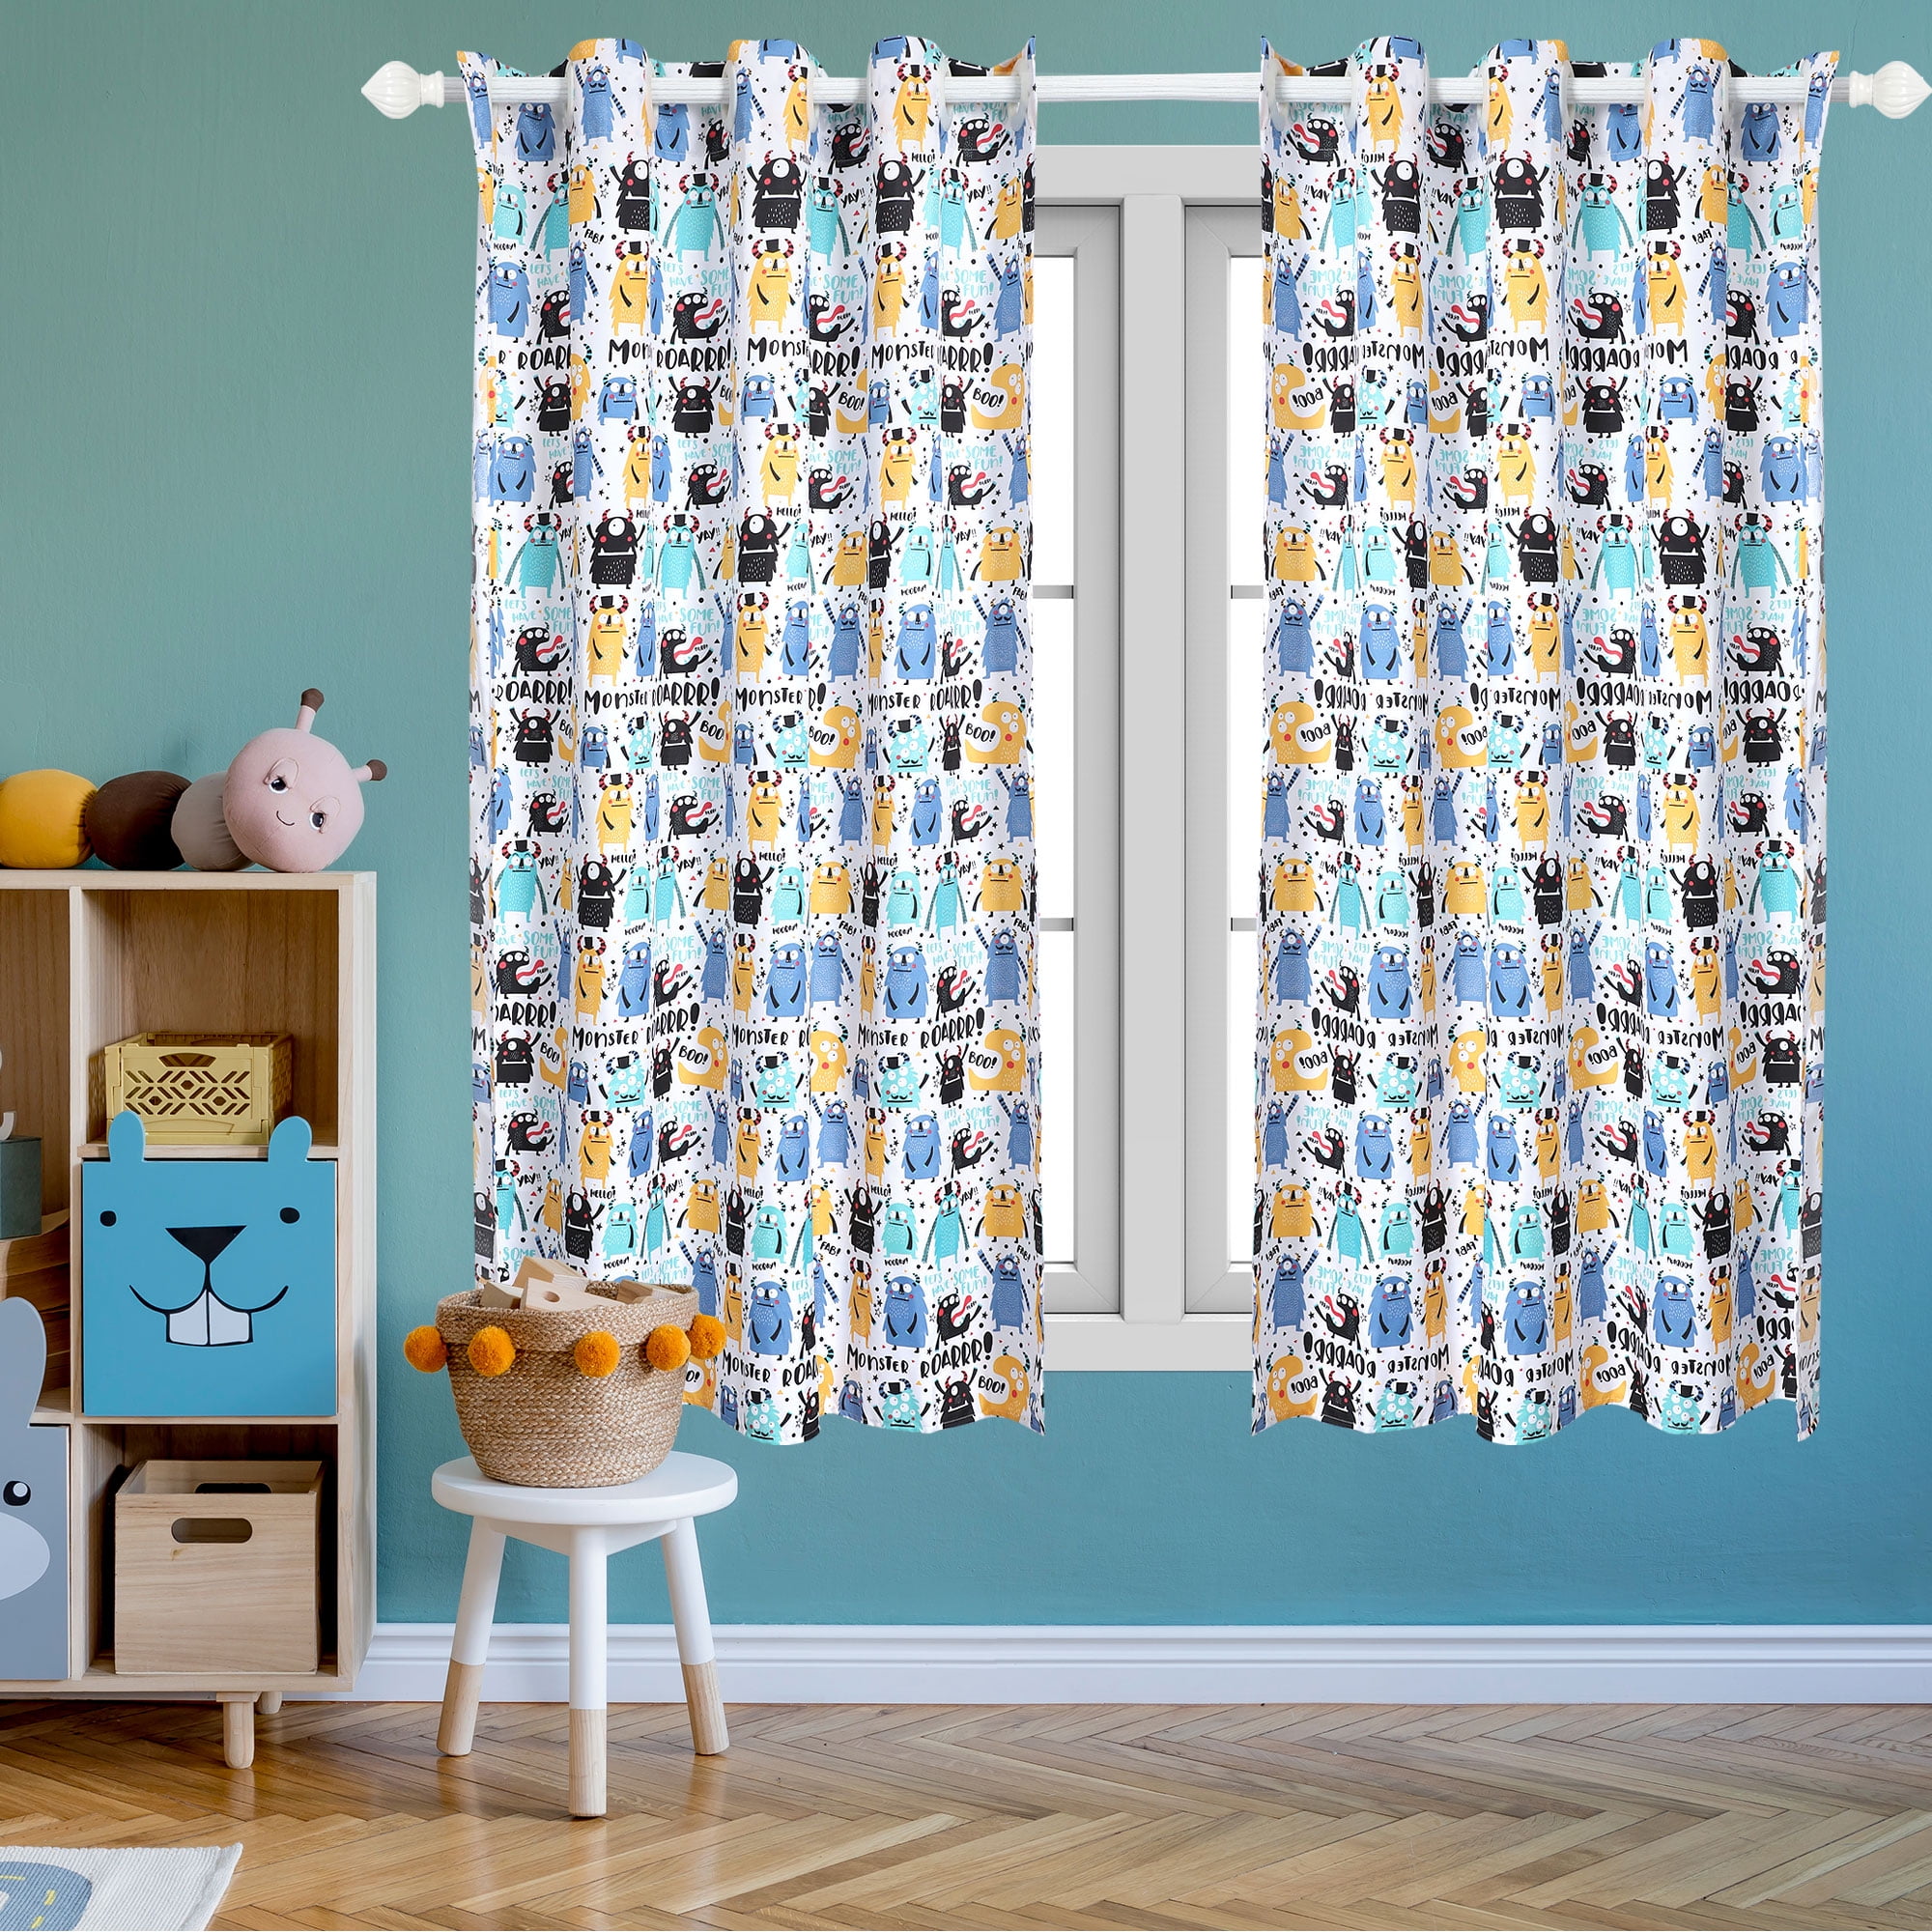 Cute Rocks Looked At 3D Curtain Blockout Photo Print Curtains Fabric kIds Window